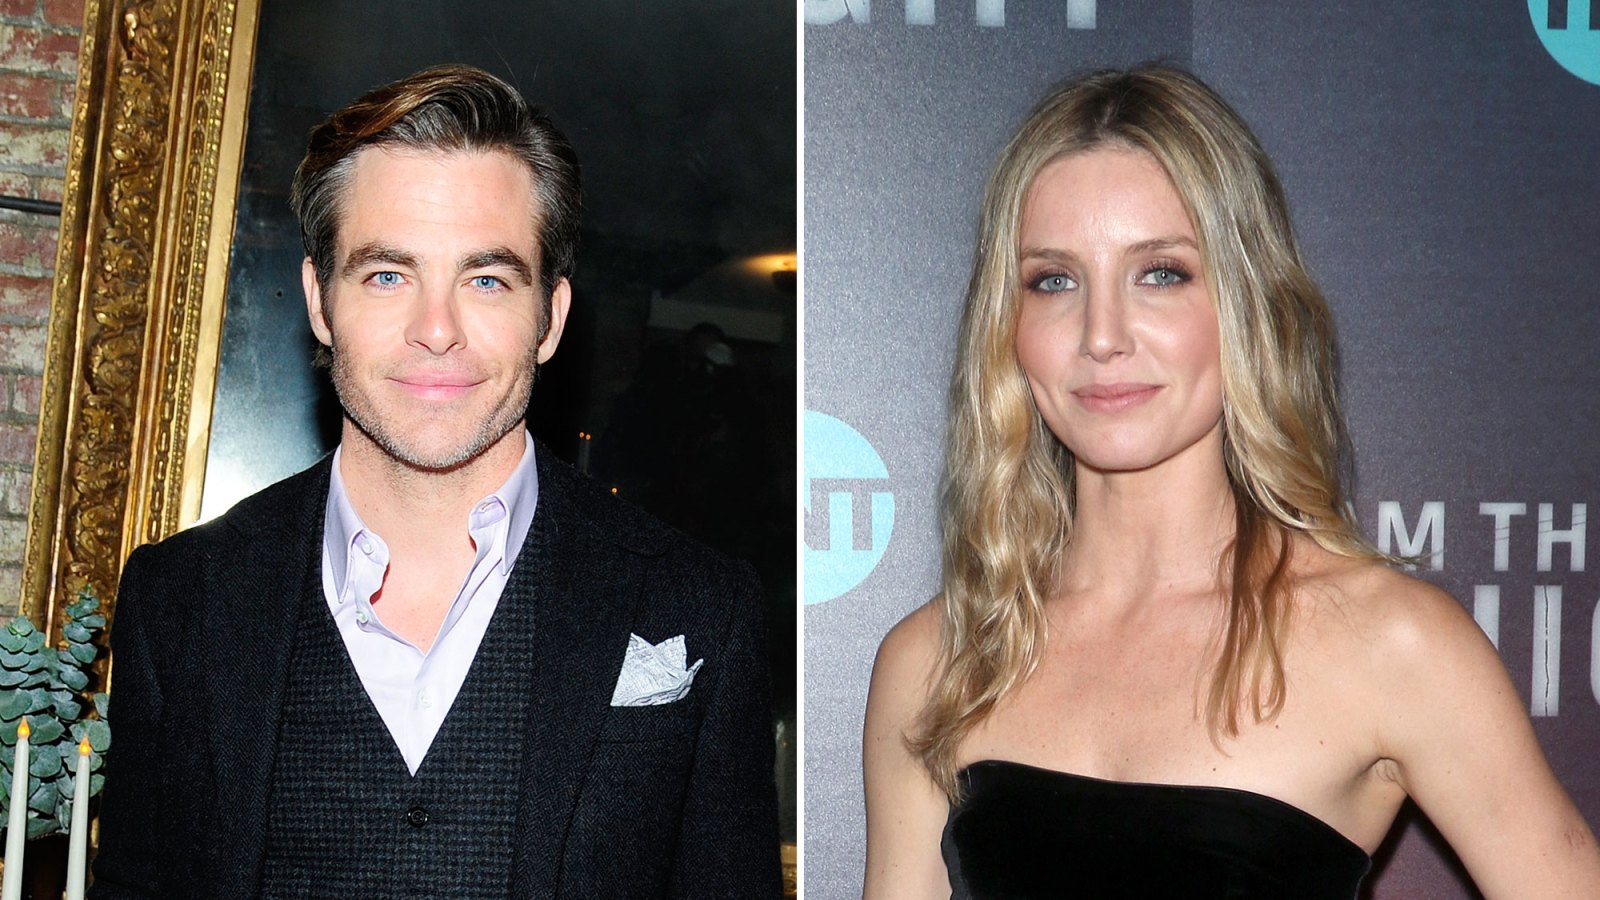 Chris Pine Annabelle Wallis Showed PDA Looked Very Cozy at Afterparty